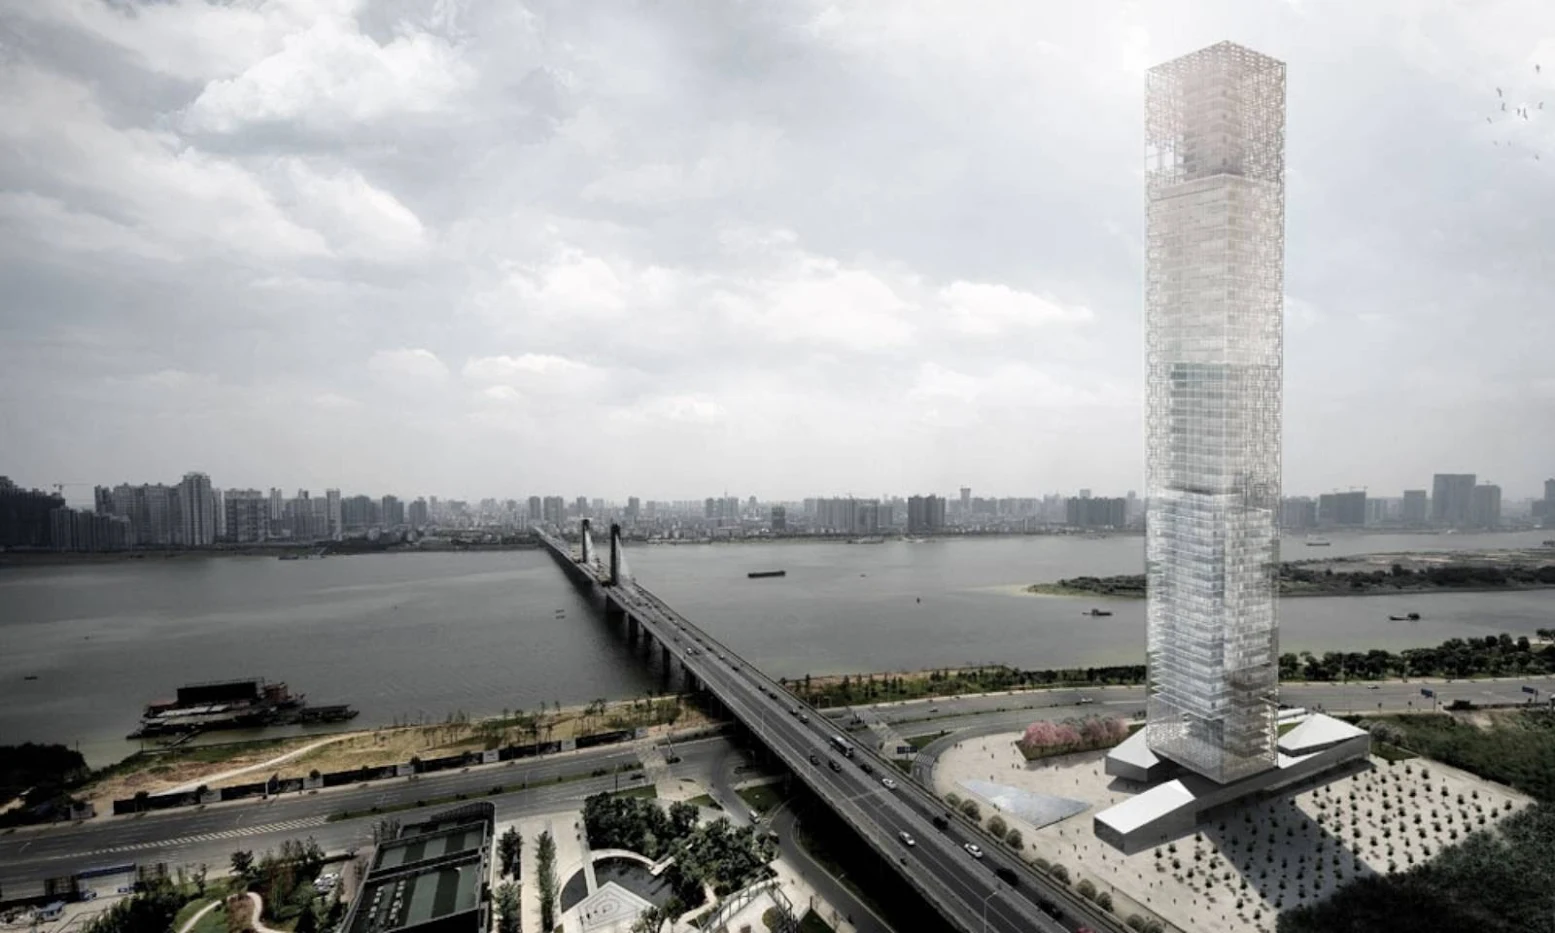 Xiang River Tower by RRC Studio